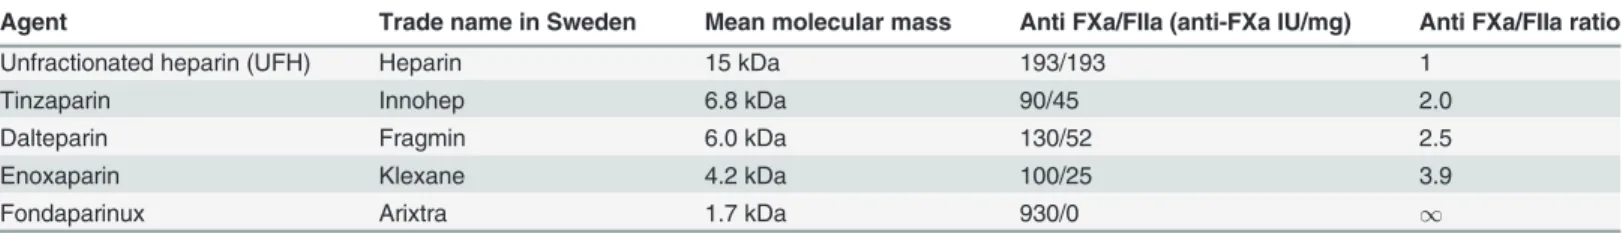 Table 1. Molecular weight and anti-factor Xa and anti-factor IIa activities of heparin and commonly used low molecular weight heparins (LMWH)